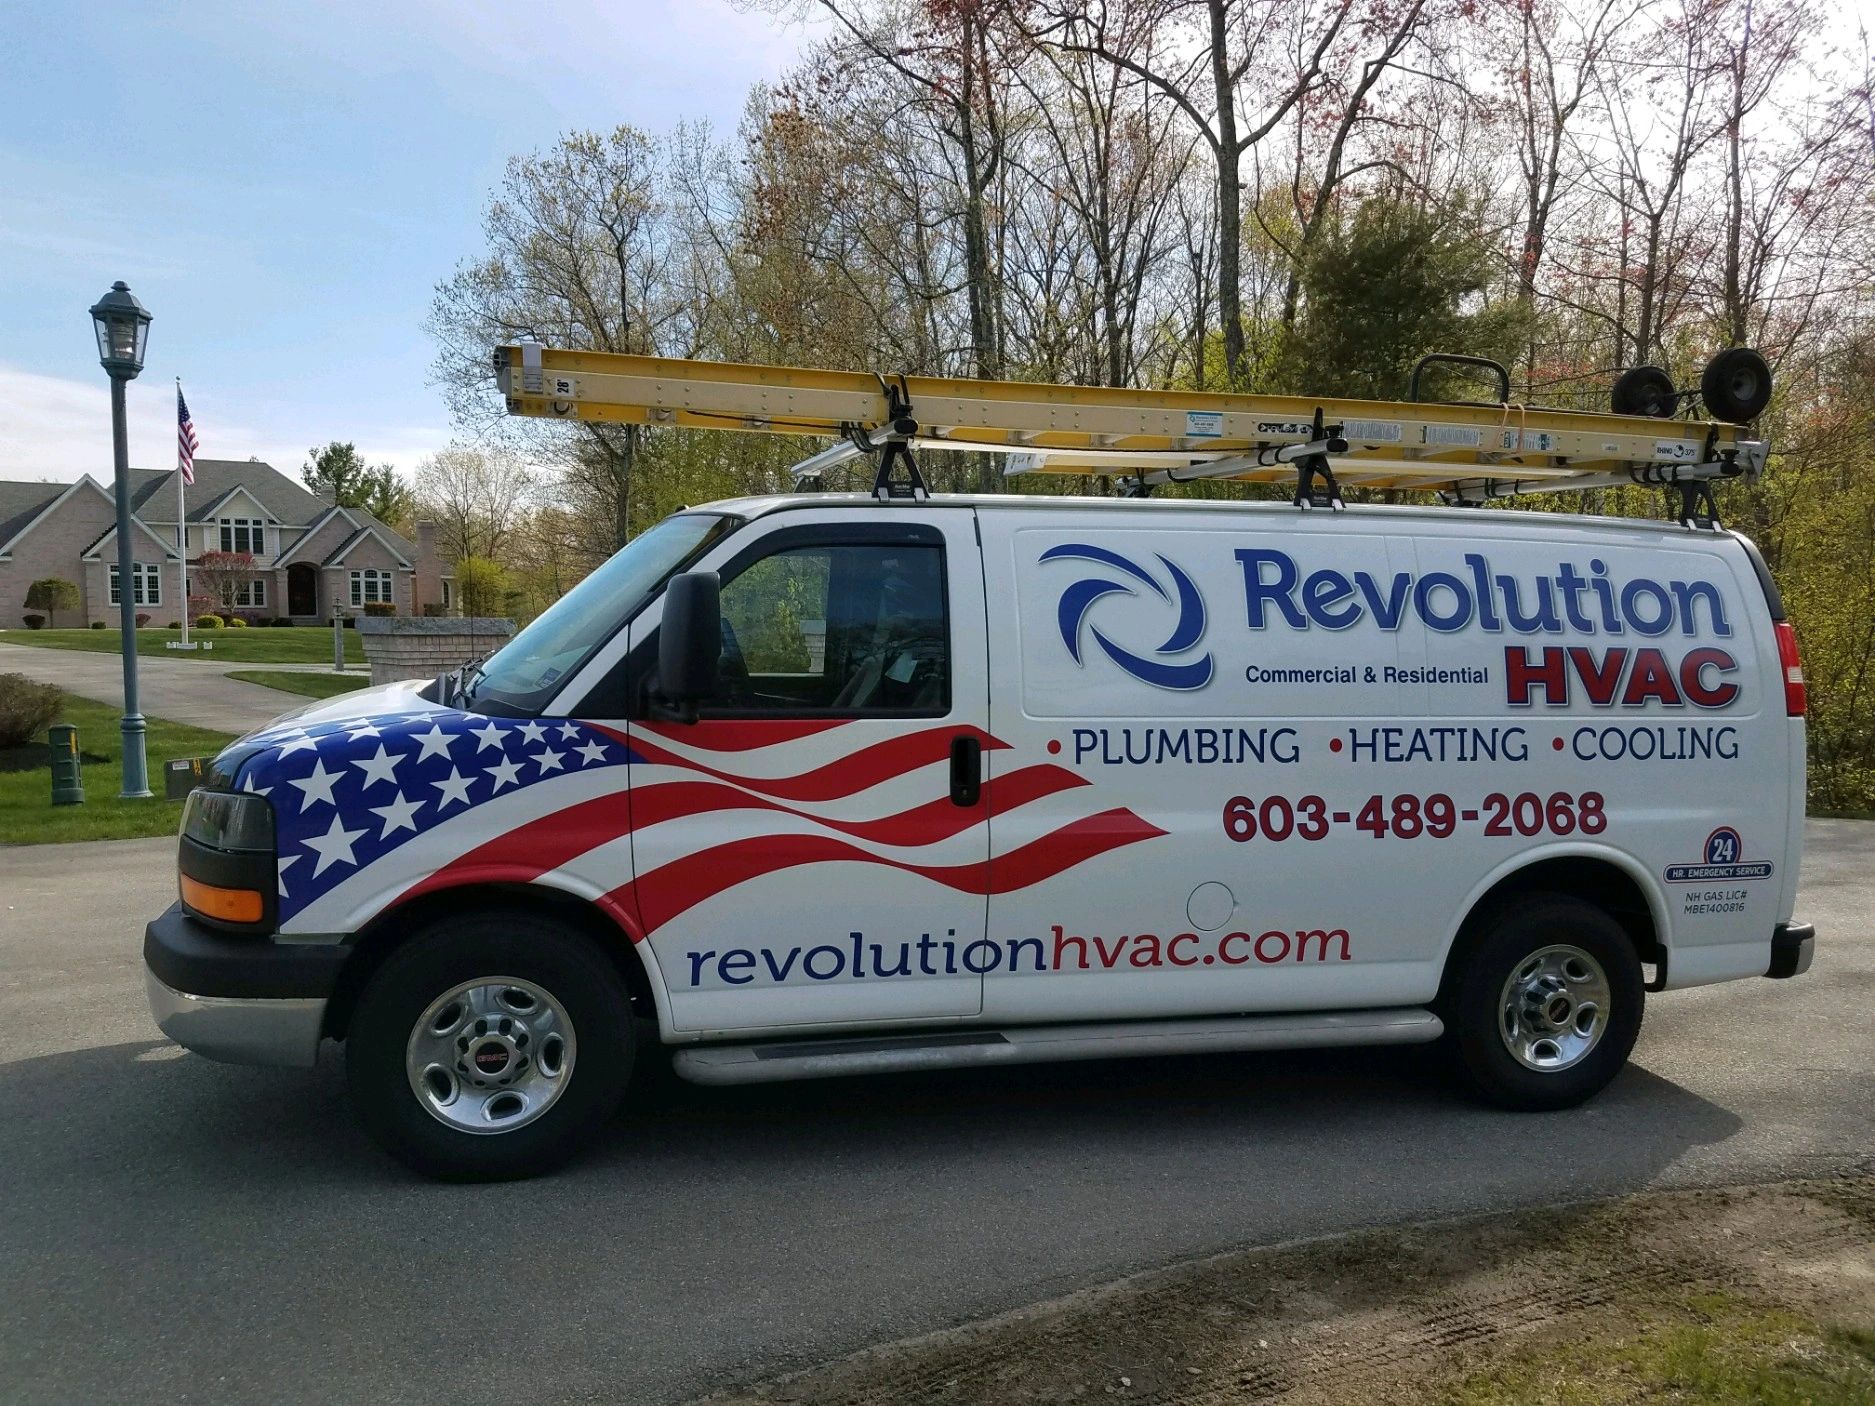 Revolution HVAC based out of Atkinson NH, Your heating and cooling professionals